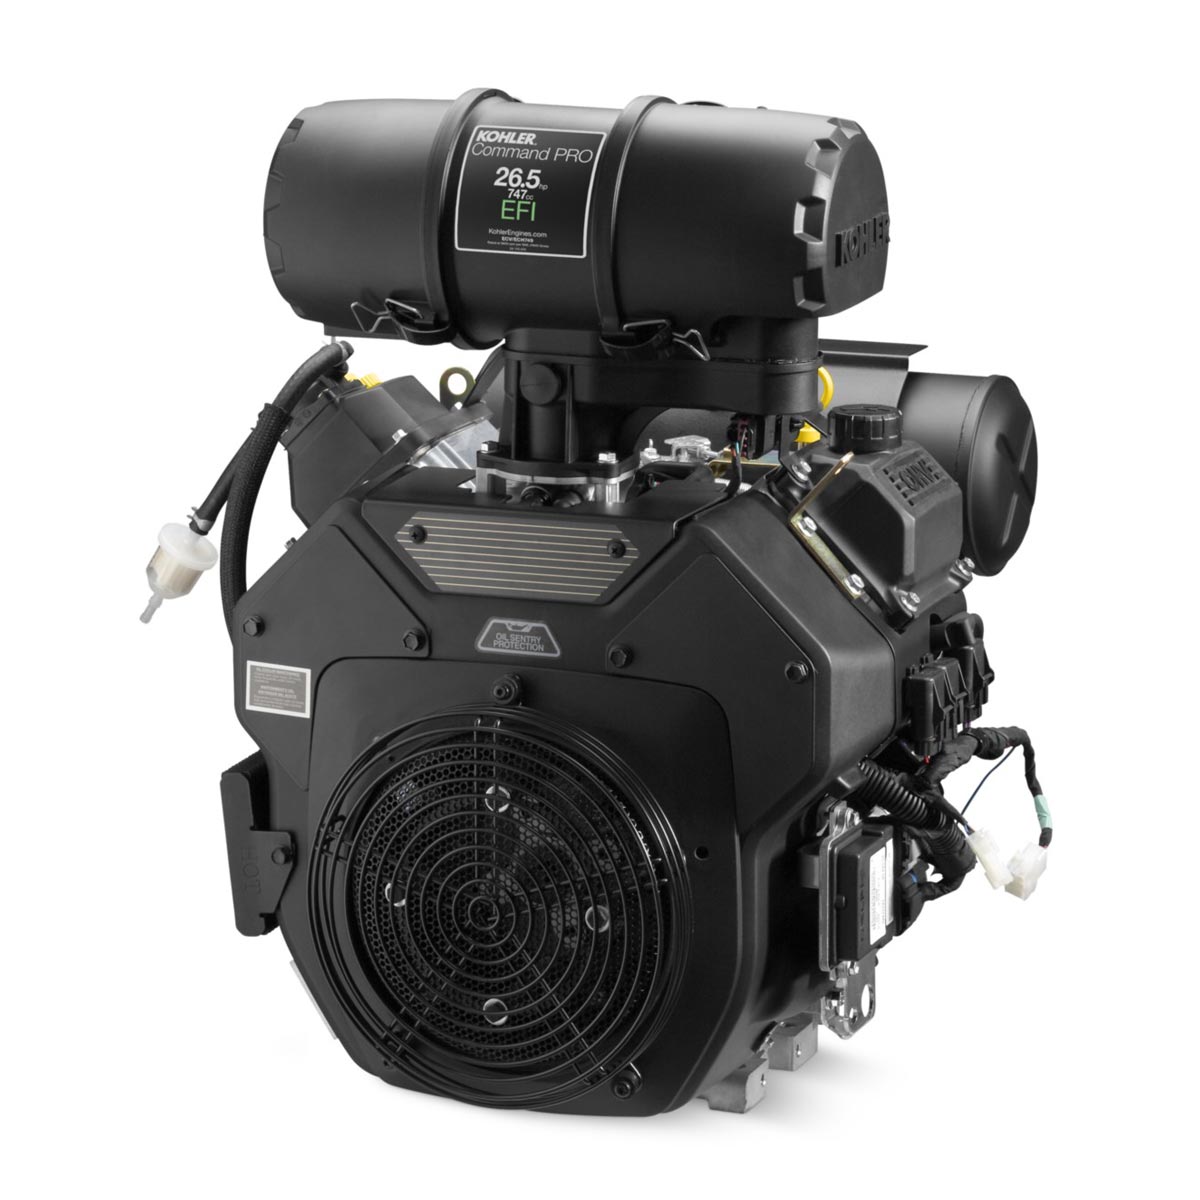 Kohler PA-ECH749-3107 PES-JETTERS NORTHWEST 26.5 Hp Engine HDAC Heavy Duty Air Cleaner Fuel Injected EFI